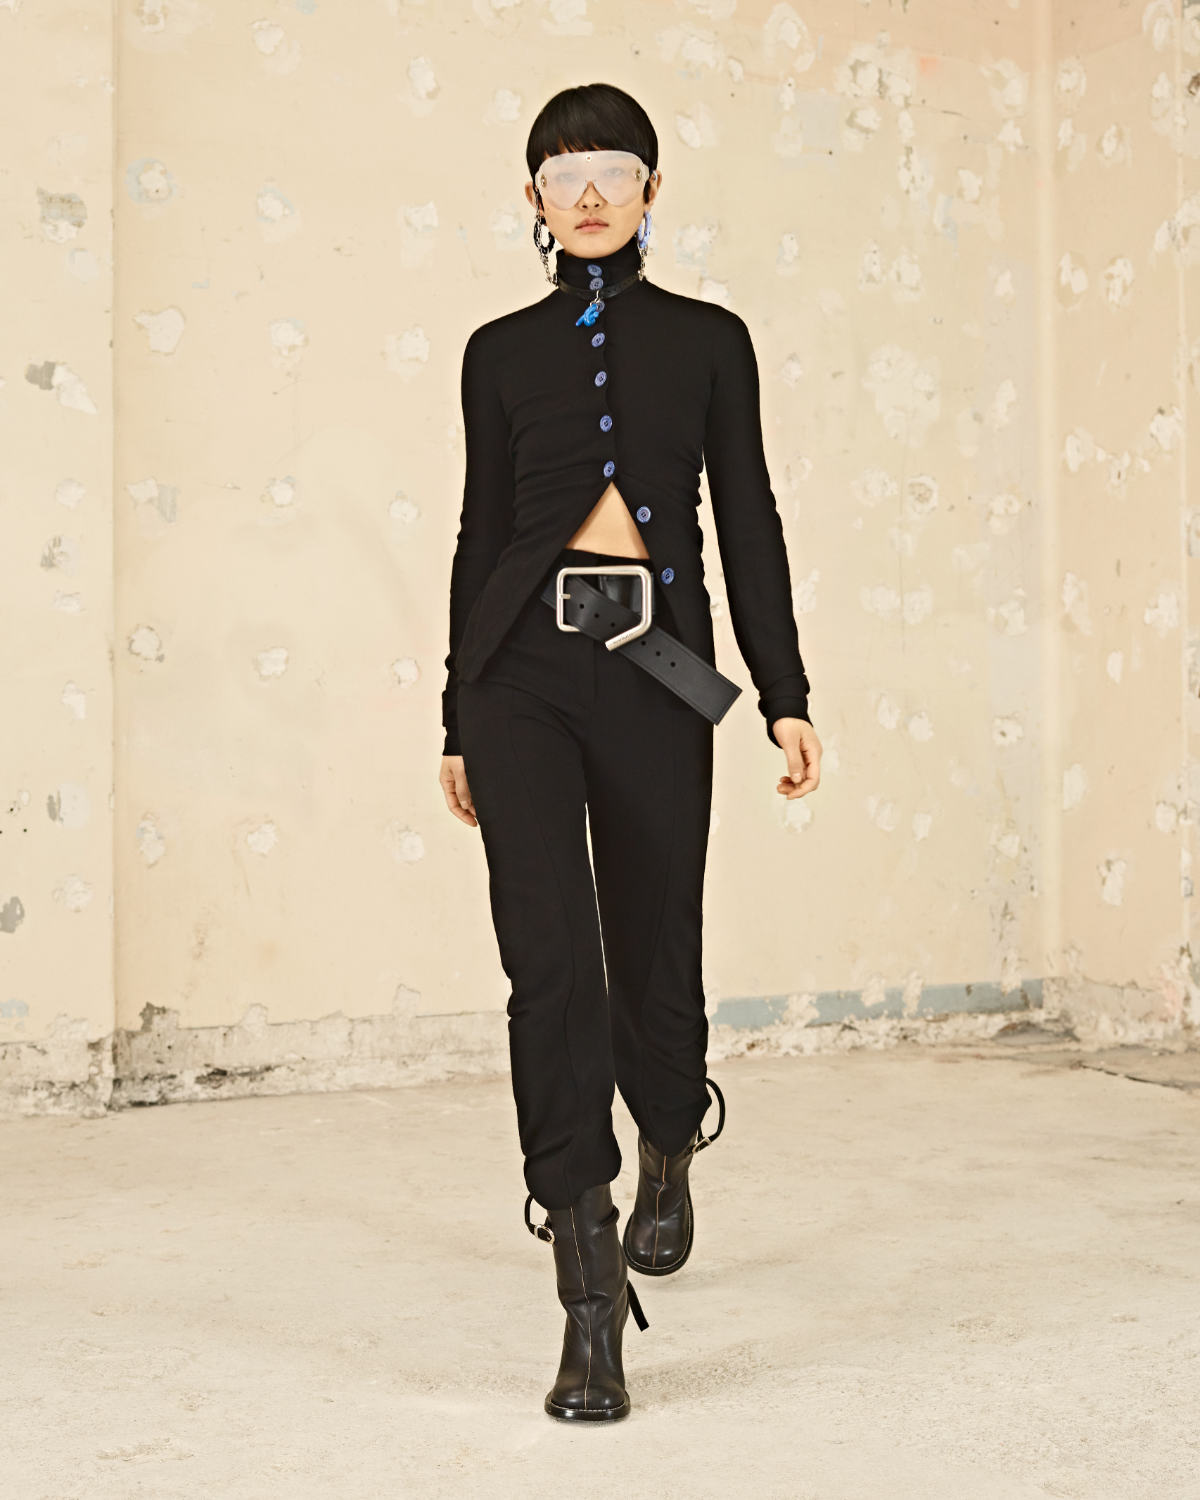 Acne Studios Presents Its Sensational Women’s Fall/Winter 2021 Collection